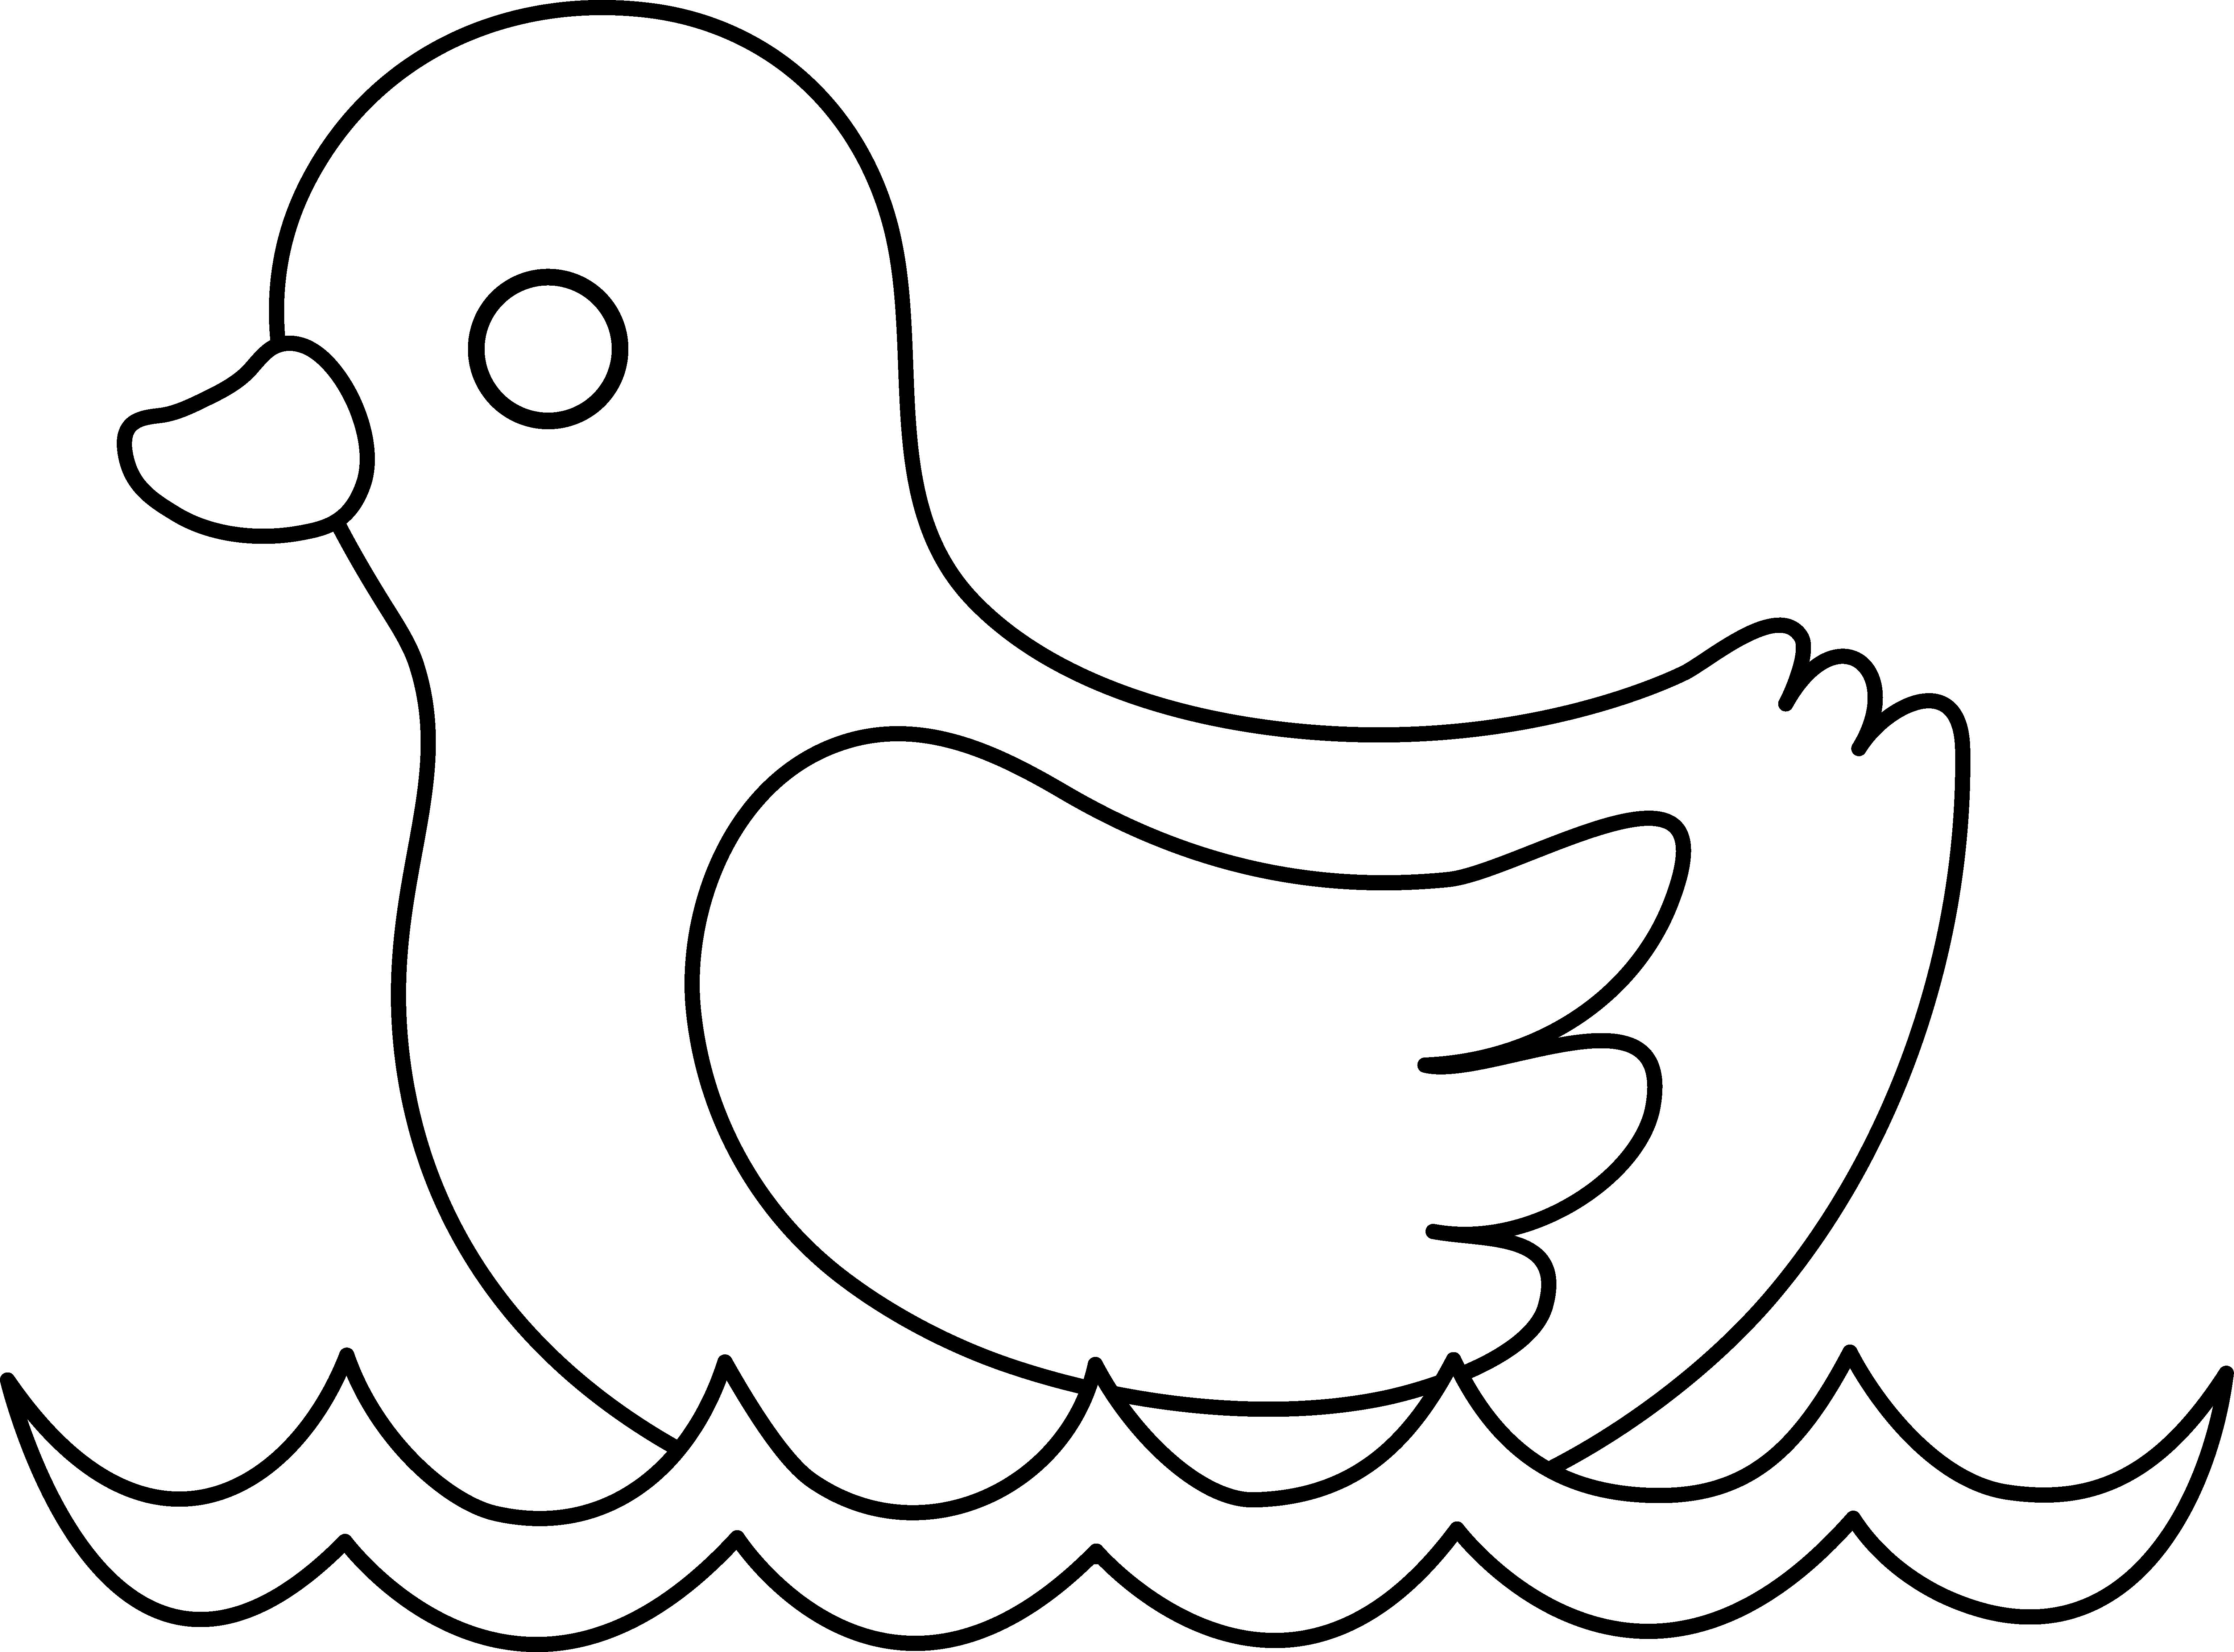 Cartoon duck clipart black and white outline